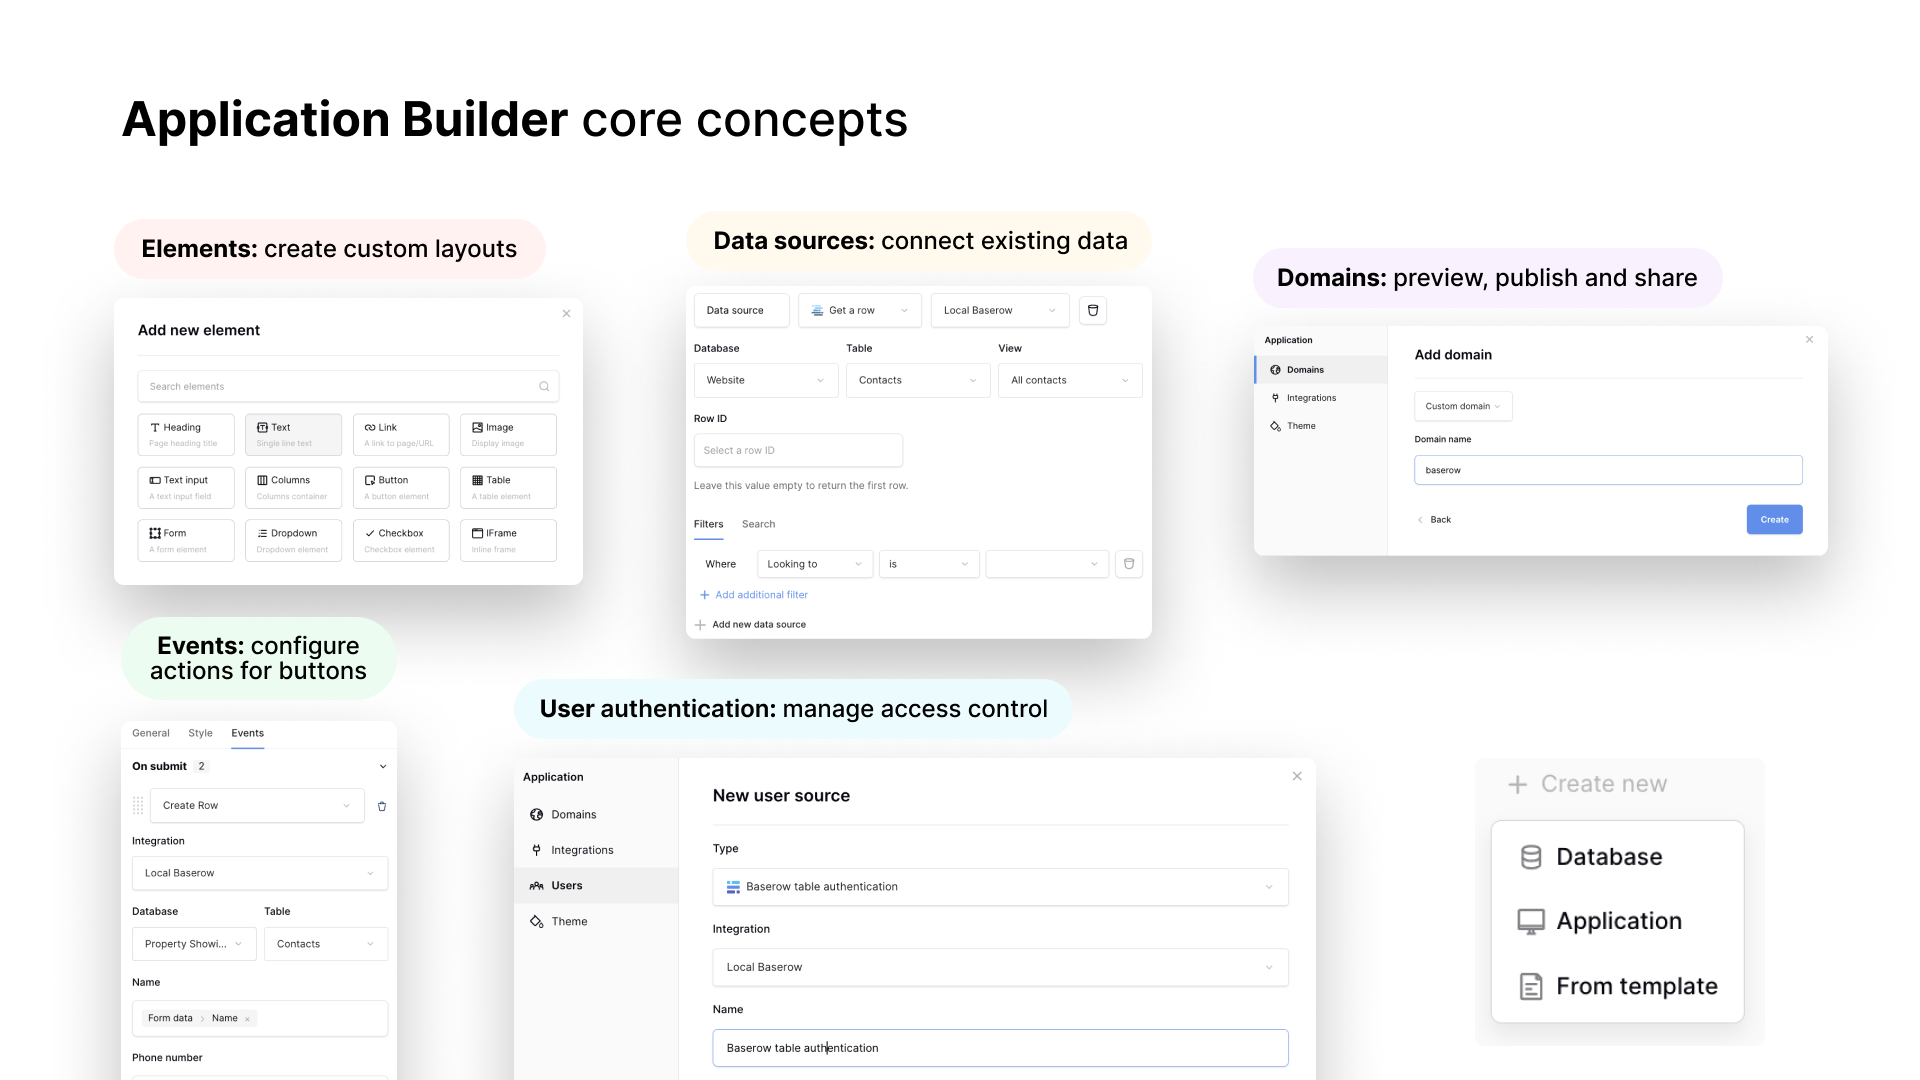 Application Builder's components allow you to create websites, internal tools, public or private portals, portfolio pages, and more. Plus, authenticate users for granular controls and access.